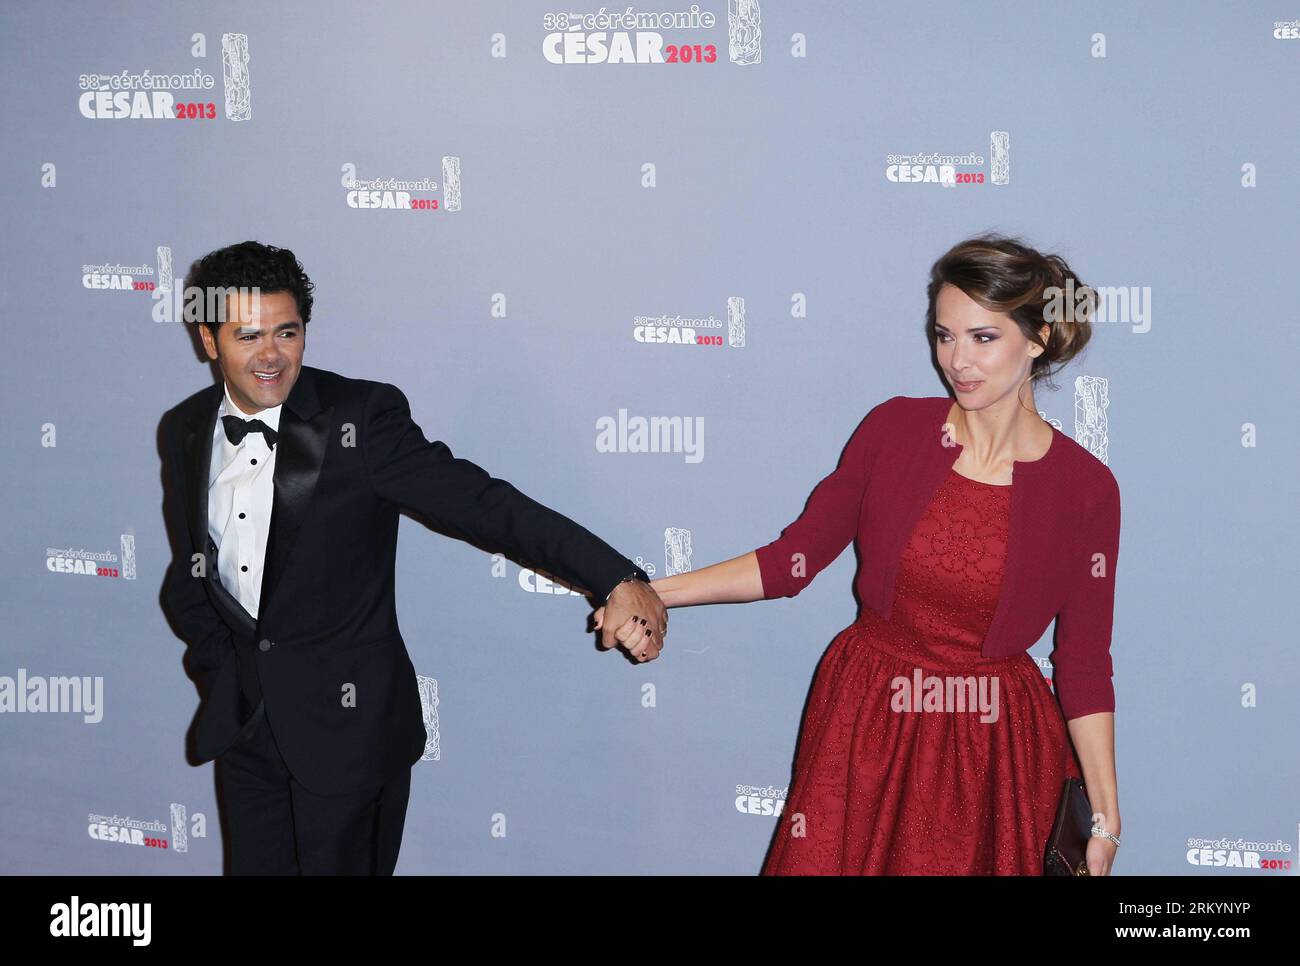 Bildnummer: 59260767  Datum: 22.02.2013  Copyright: imago/Xinhua French actor Jamel Debbouze (L) and his wife, French journalist Melissa Theuriau (R) arrive at the 38th annual Cesar awards ceremony held at the Chatelet Theatre in Paris, France, Feb. 22, 2013. (Xinhua/Gao Jing) FRANCE-PARIS-CESAR-AWARD-CEREMONY PUBLICATIONxNOTxINxCHN People Entertainment Film Kultur Filmpreis Paris Pressetermin xdp x1x premiumd 2013 quer o0 Familie, privat, Frau     59260767 Date 22 02 2013 Copyright Imago XINHUA French Actor Jamel Debbouze l and His wife French Journalist Melissa Theuriau r Arrive AT The 38th Stock Photo